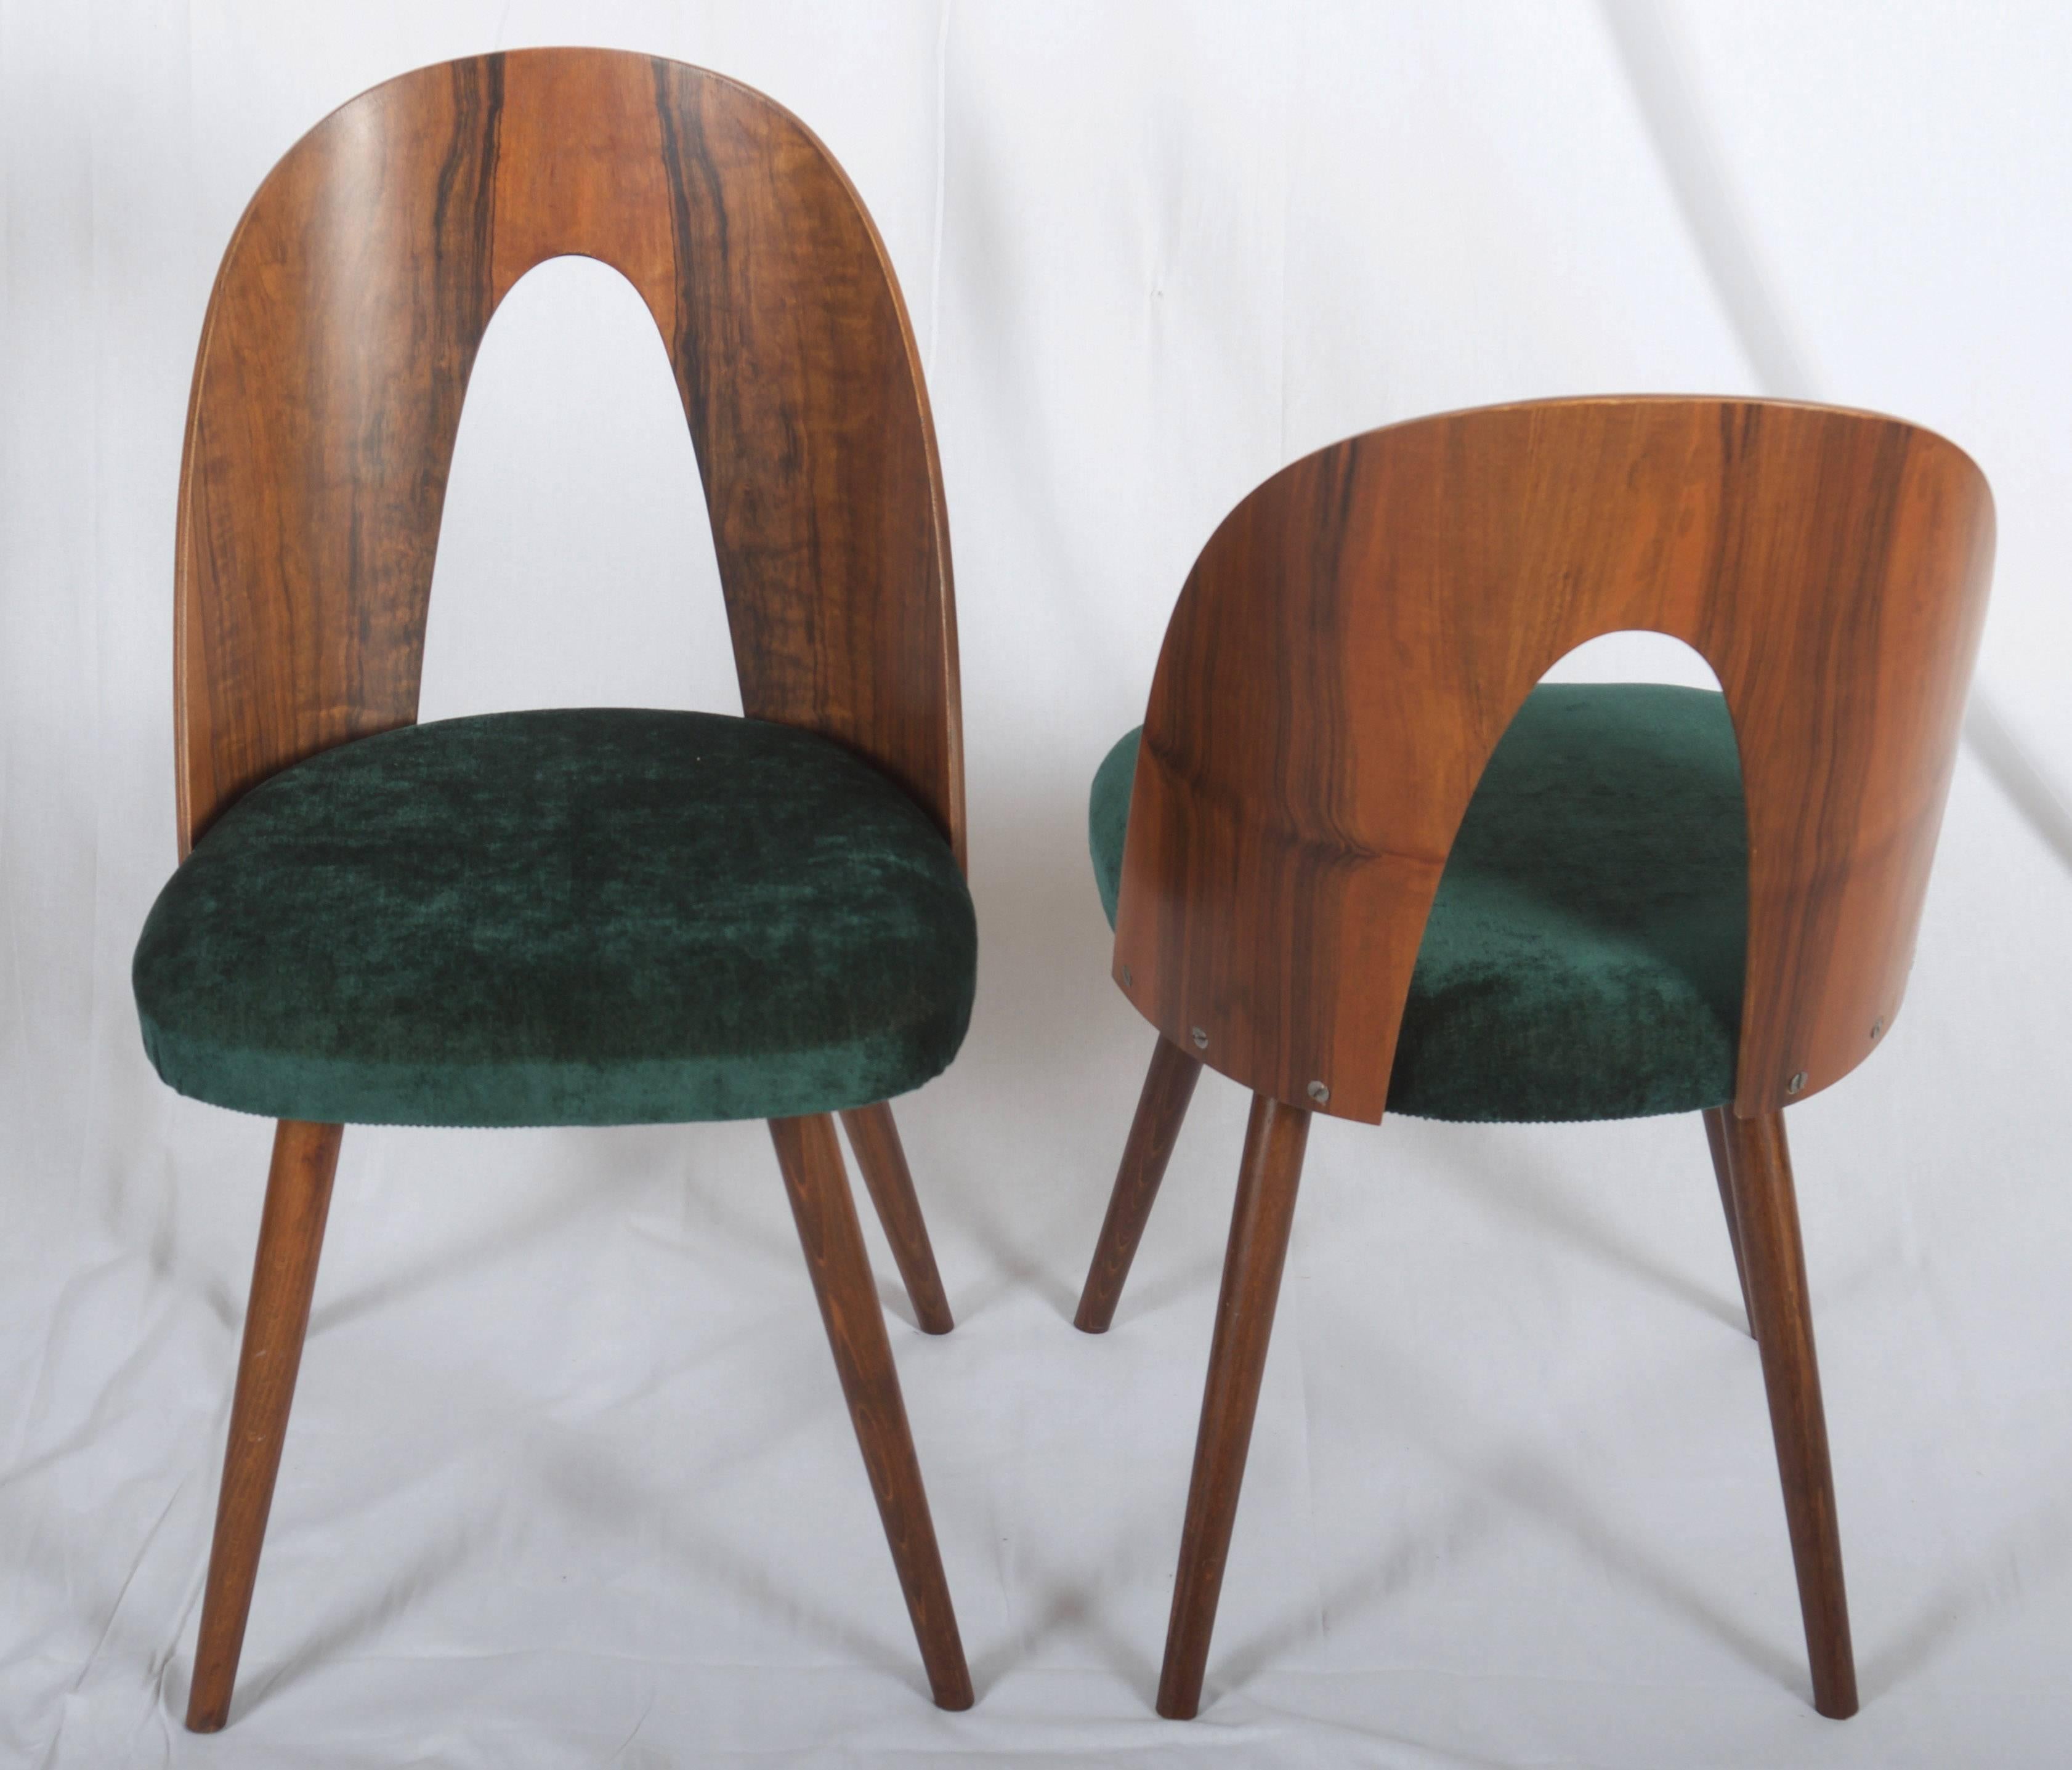 Walnut wood with walnut veneer, upholstered with emerald green velvet. Designed by Antonin Suman in the 1960s for Tatra in Czechoslovakia. The final color of the upholstery can be customized (upholstery cost incl. but not the fabric cost) 
Up to 24